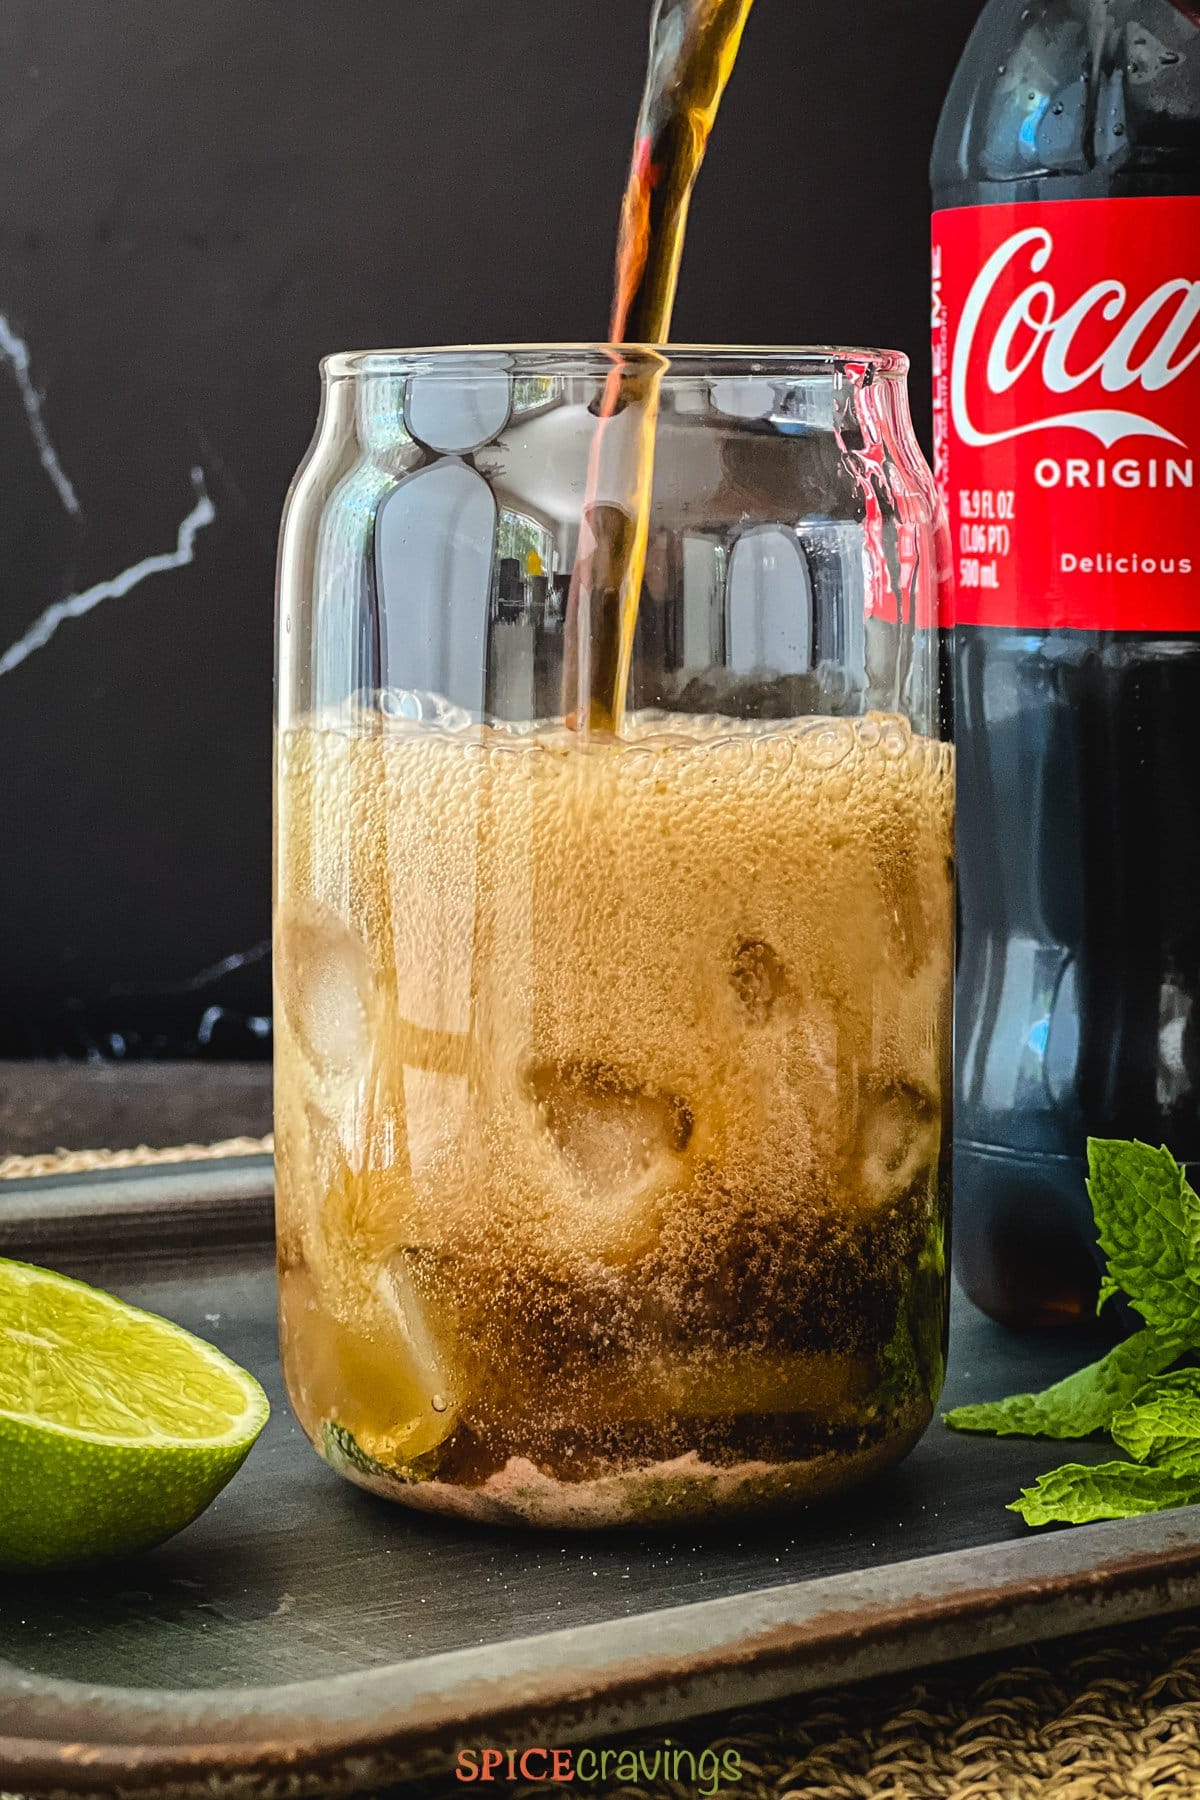 Pouring coke over ice in a glass